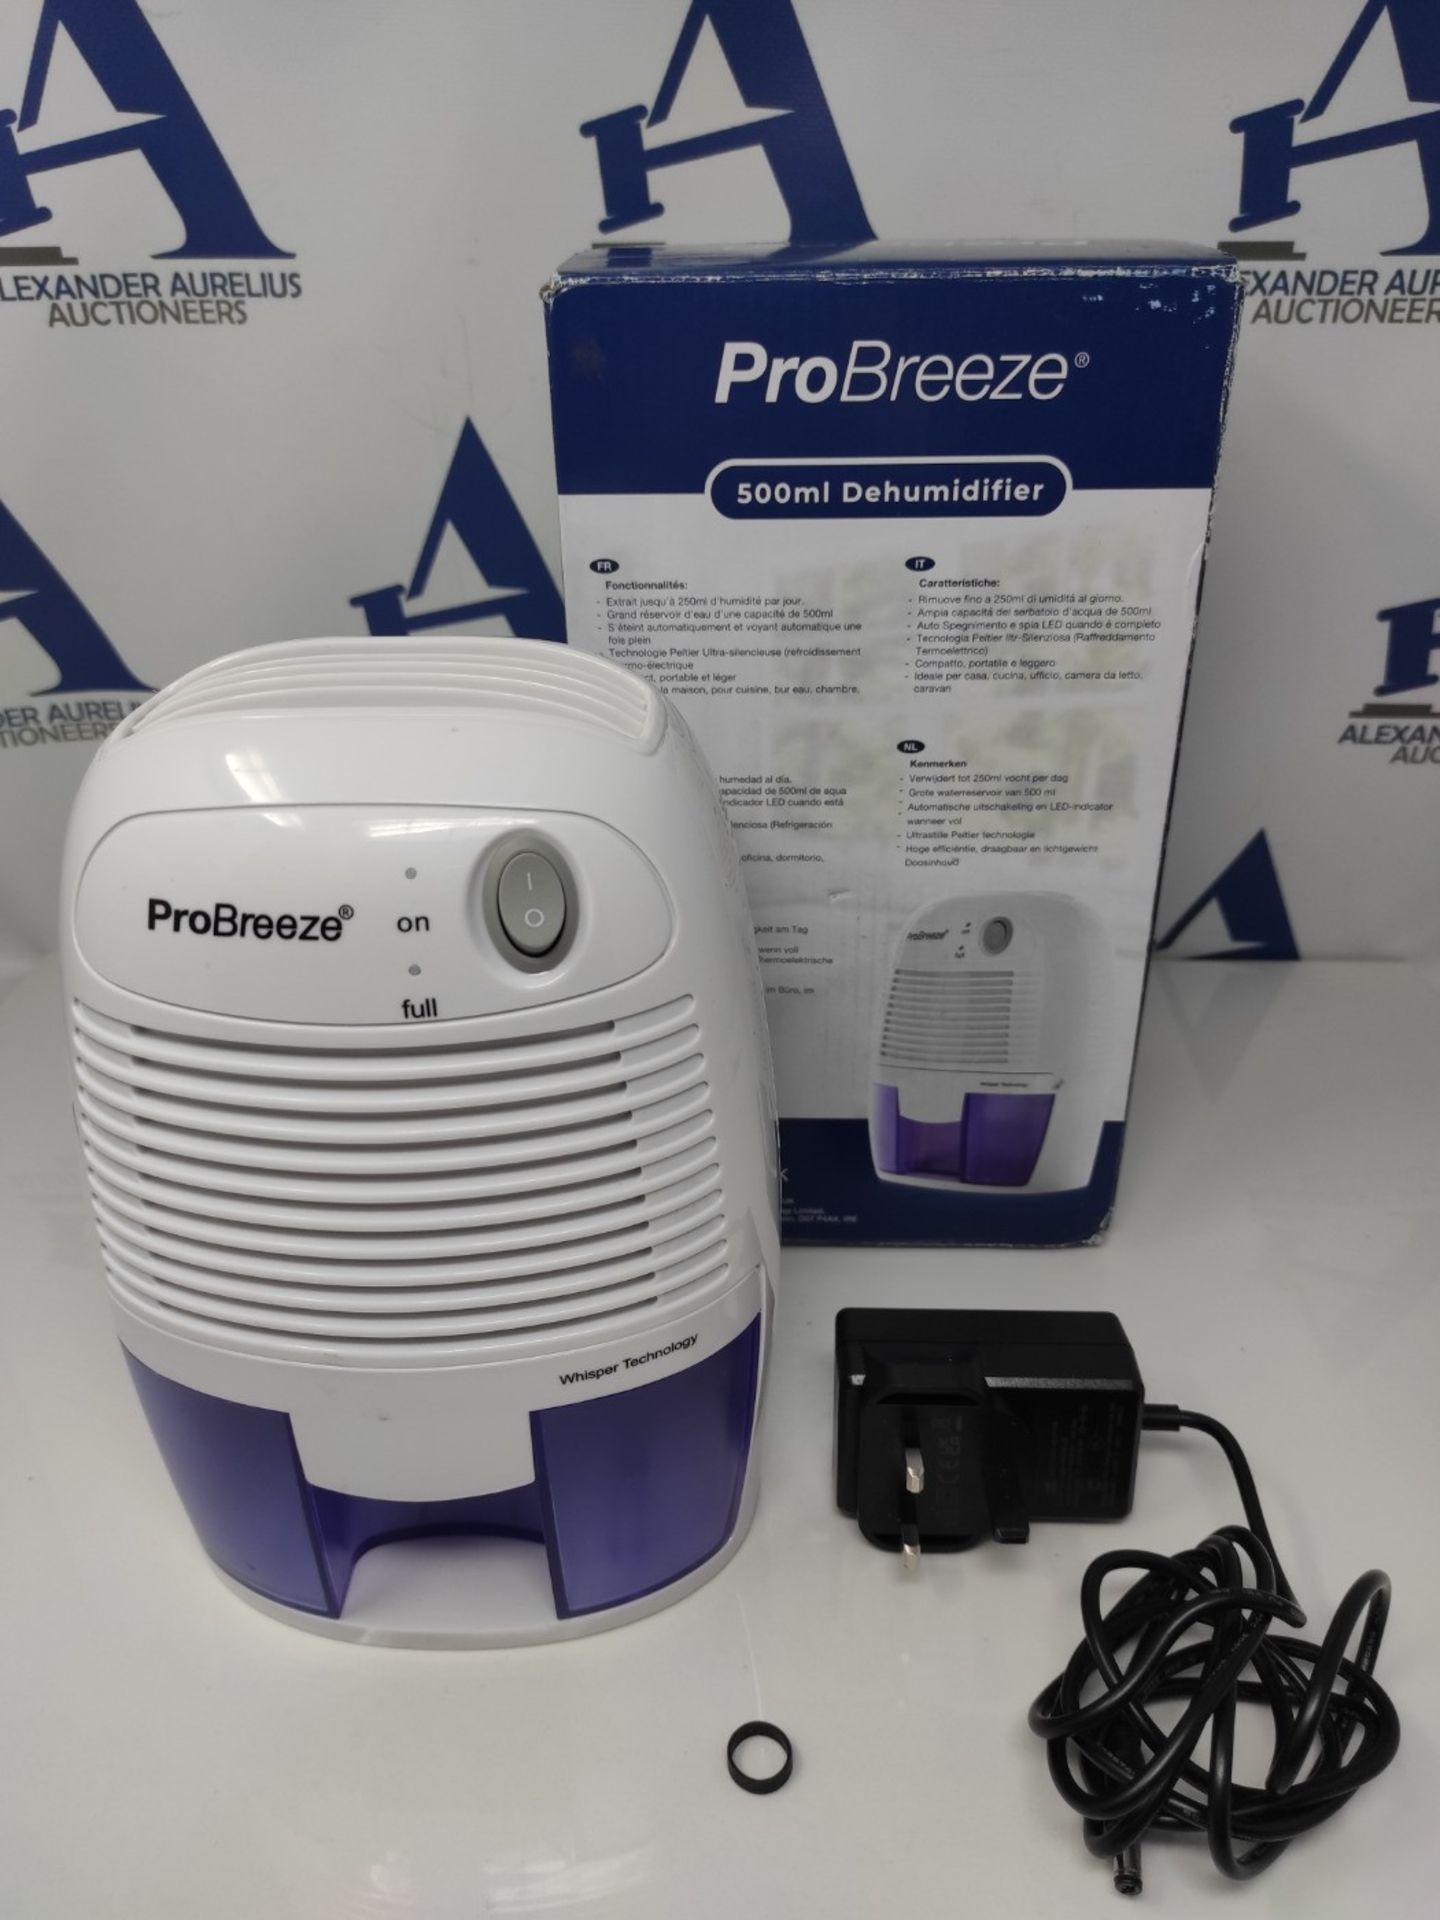 Pro Breeze Dehumidifier 500ml Compact and Portable Mini Air Dehumidifier for Damp, Mou - Image 2 of 2